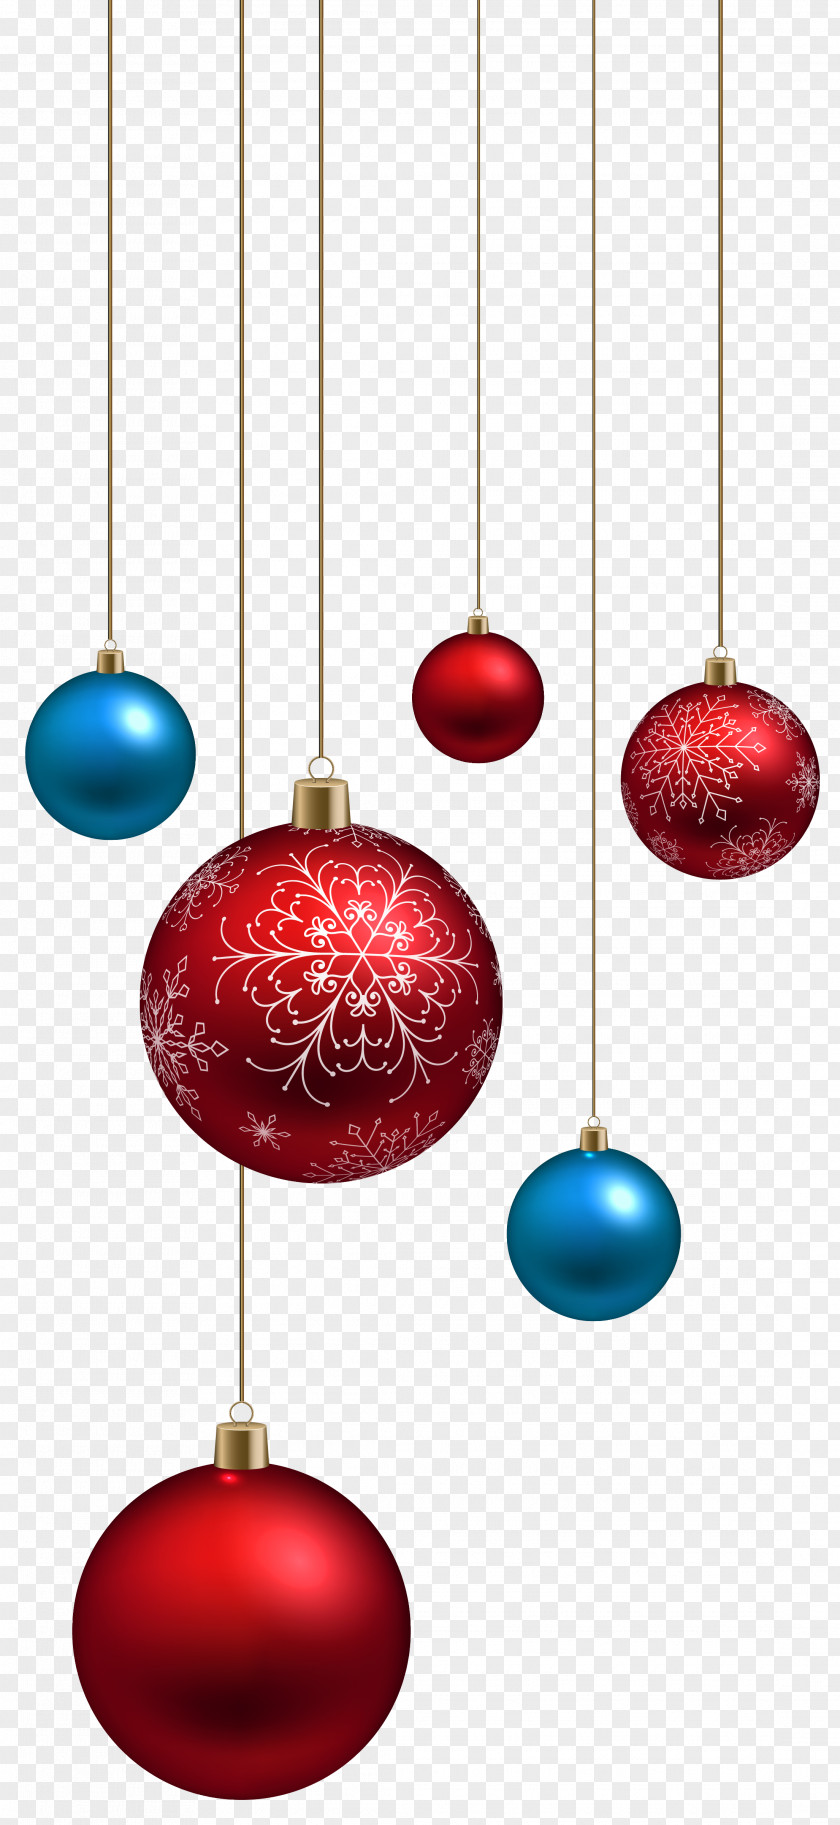 Red And Blue Christmas Balls Clipart Image Santa Claus Ornament Clip Art PNG